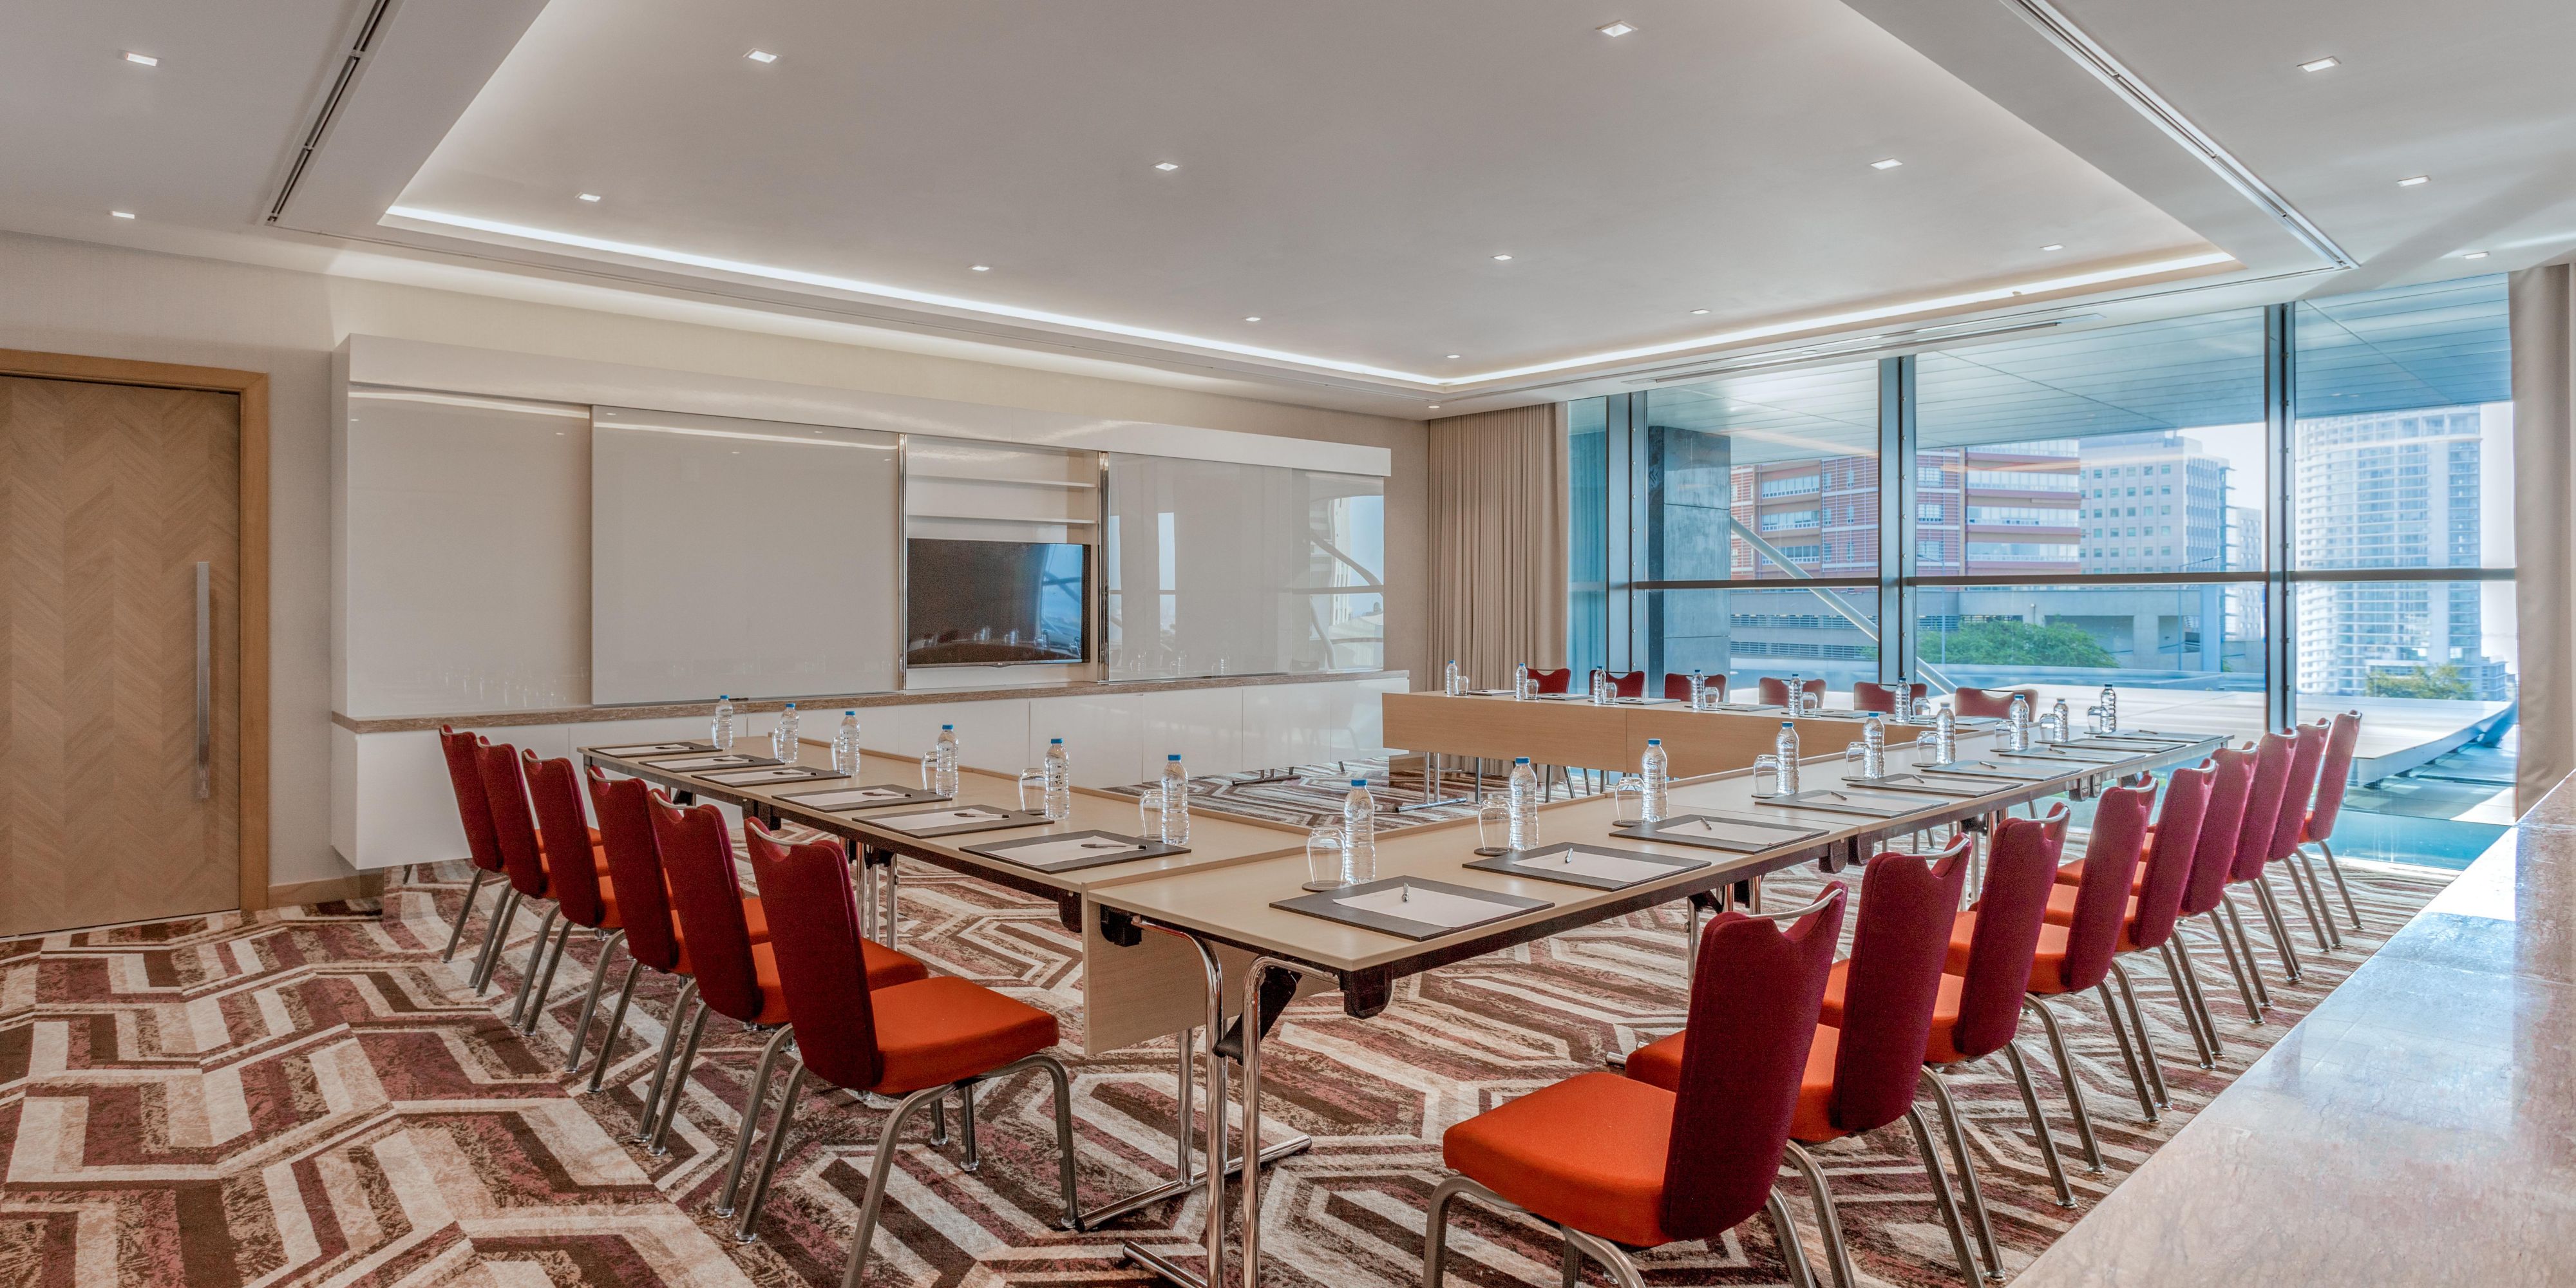 Enjoy stunning views of the bay or skyline from the largest conference and events venue in Luanda. Our premiere space features seven meeting rooms, including a boardroom and glamorous Diamond Ballroom, accommodating up to 800 guests.